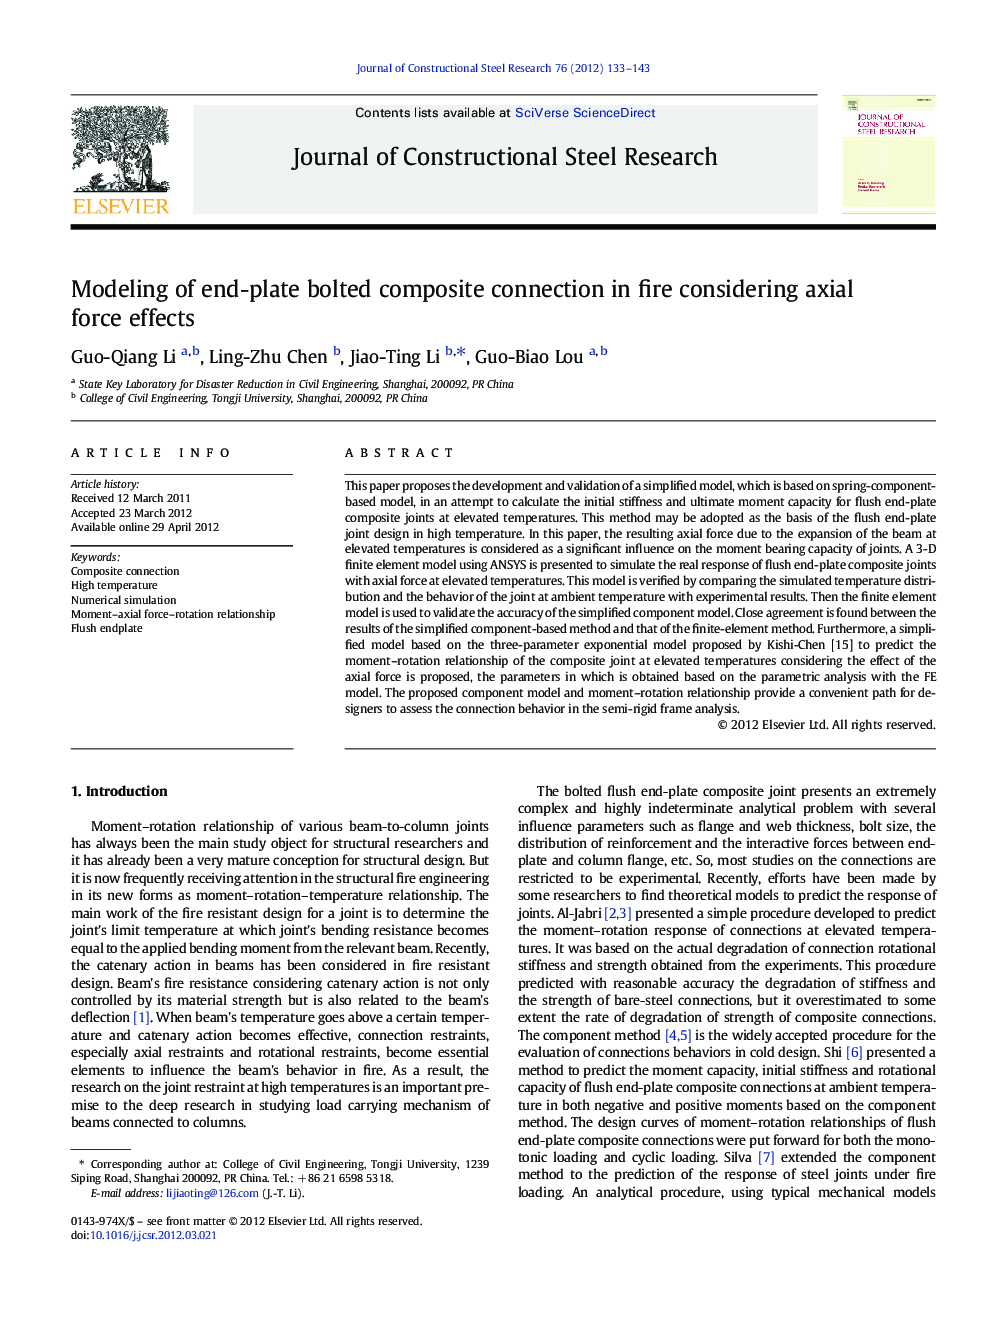 Modeling of end-plate bolted composite connection in fire considering axial force effects